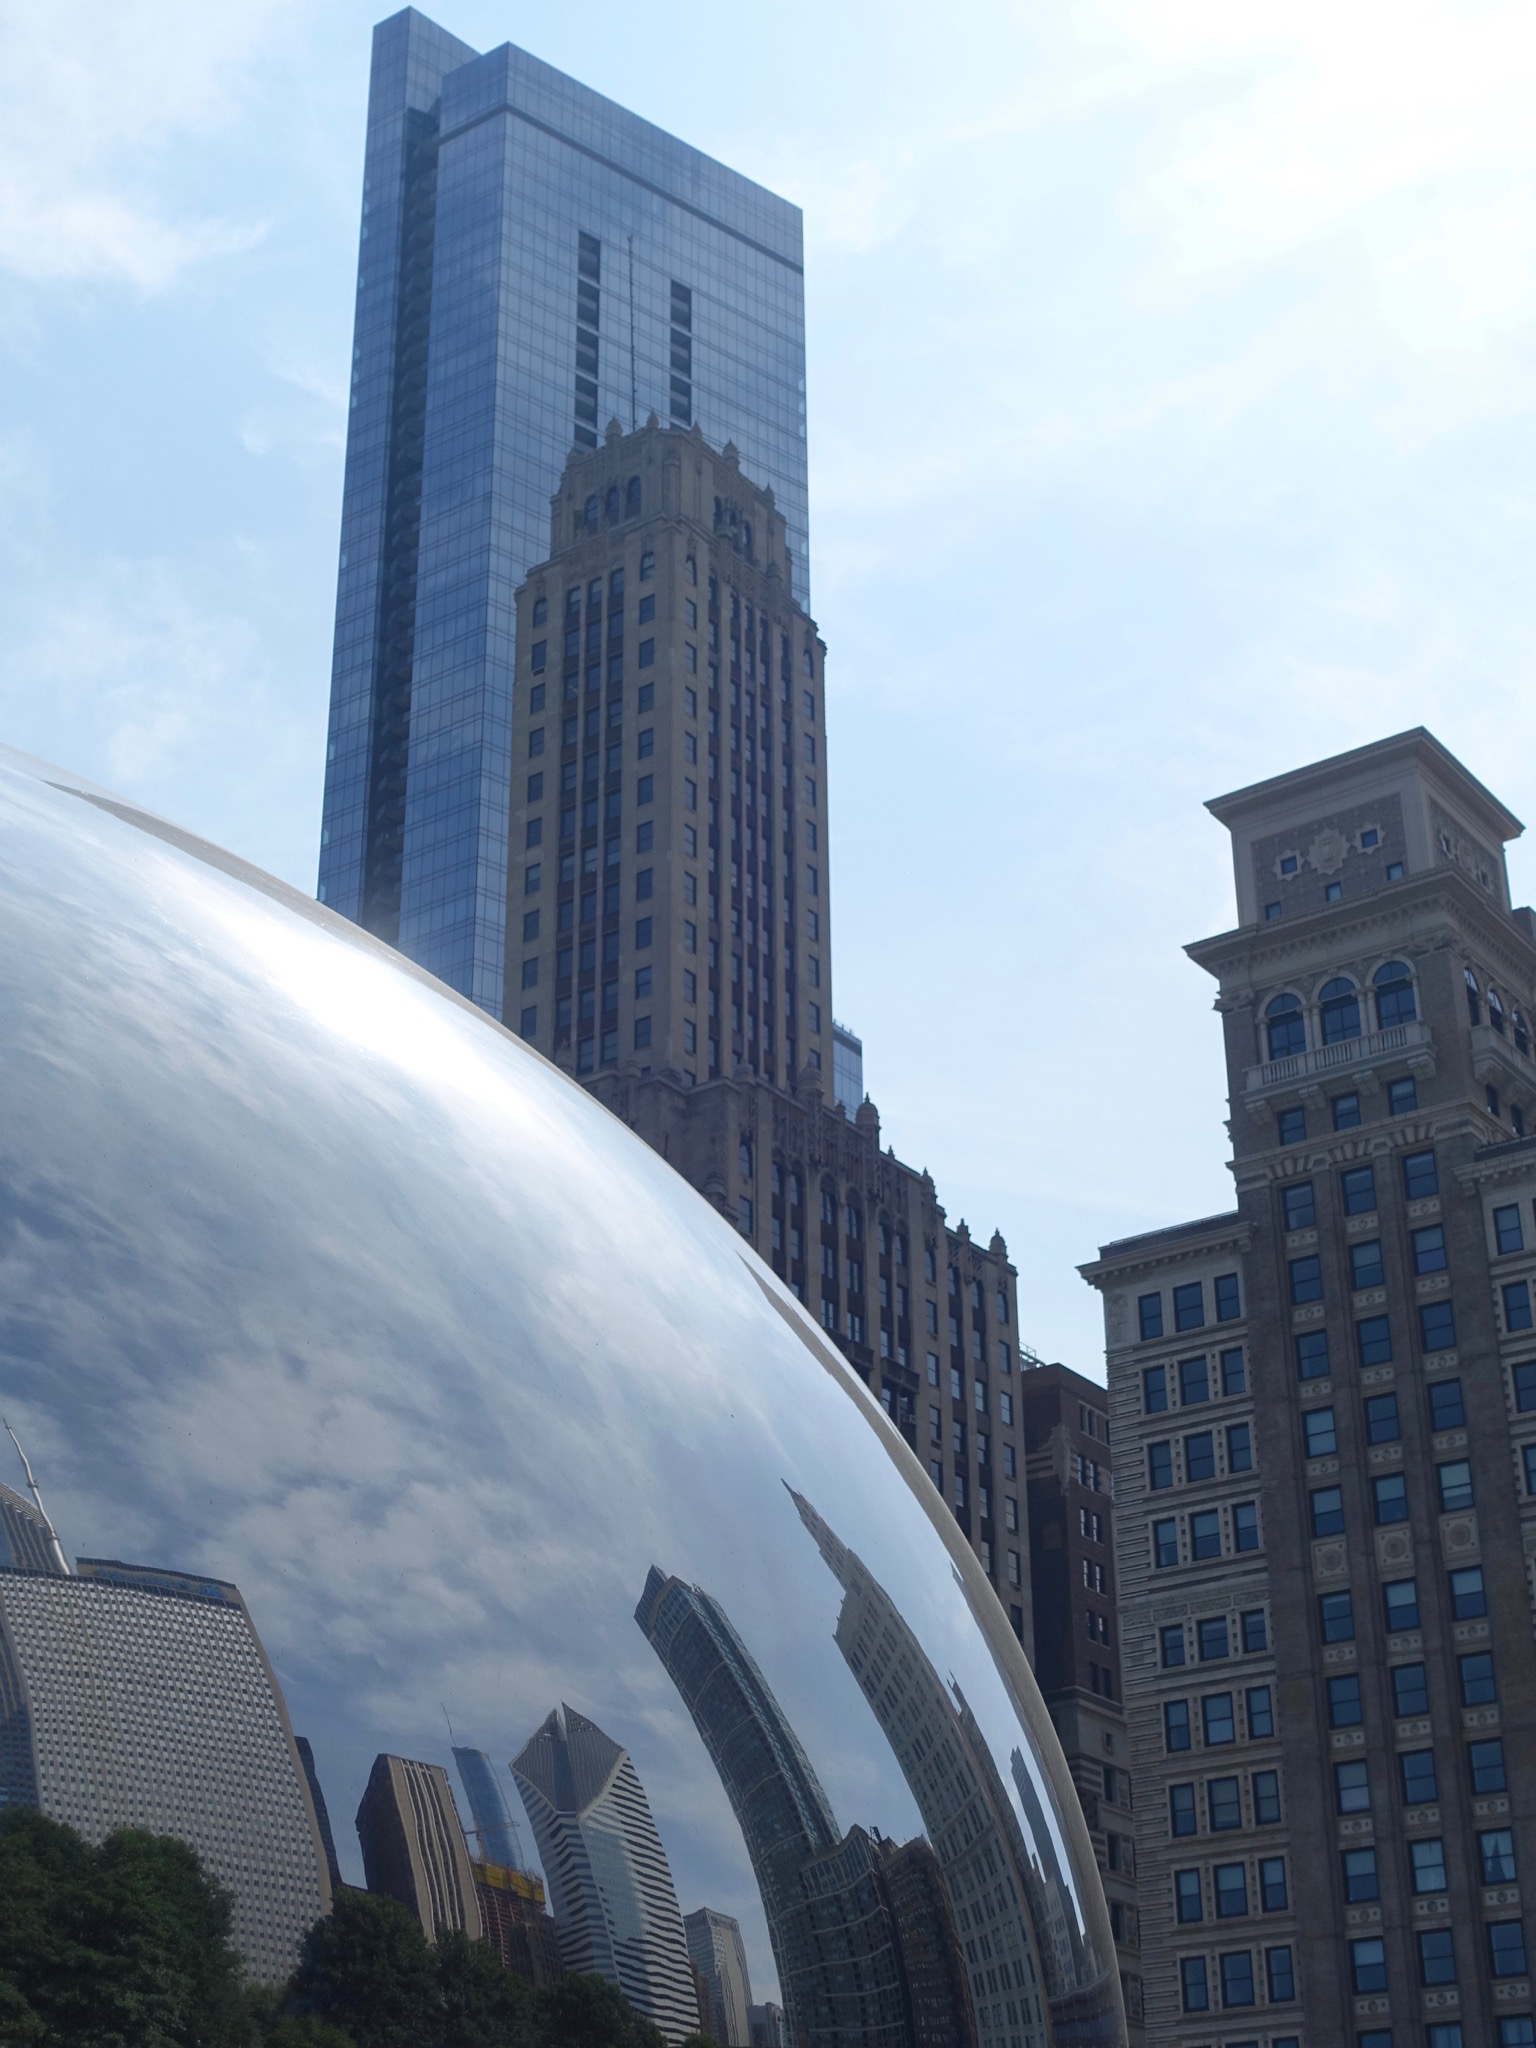 Photo 42 of 135 from the album Highlights Chicago 2015.